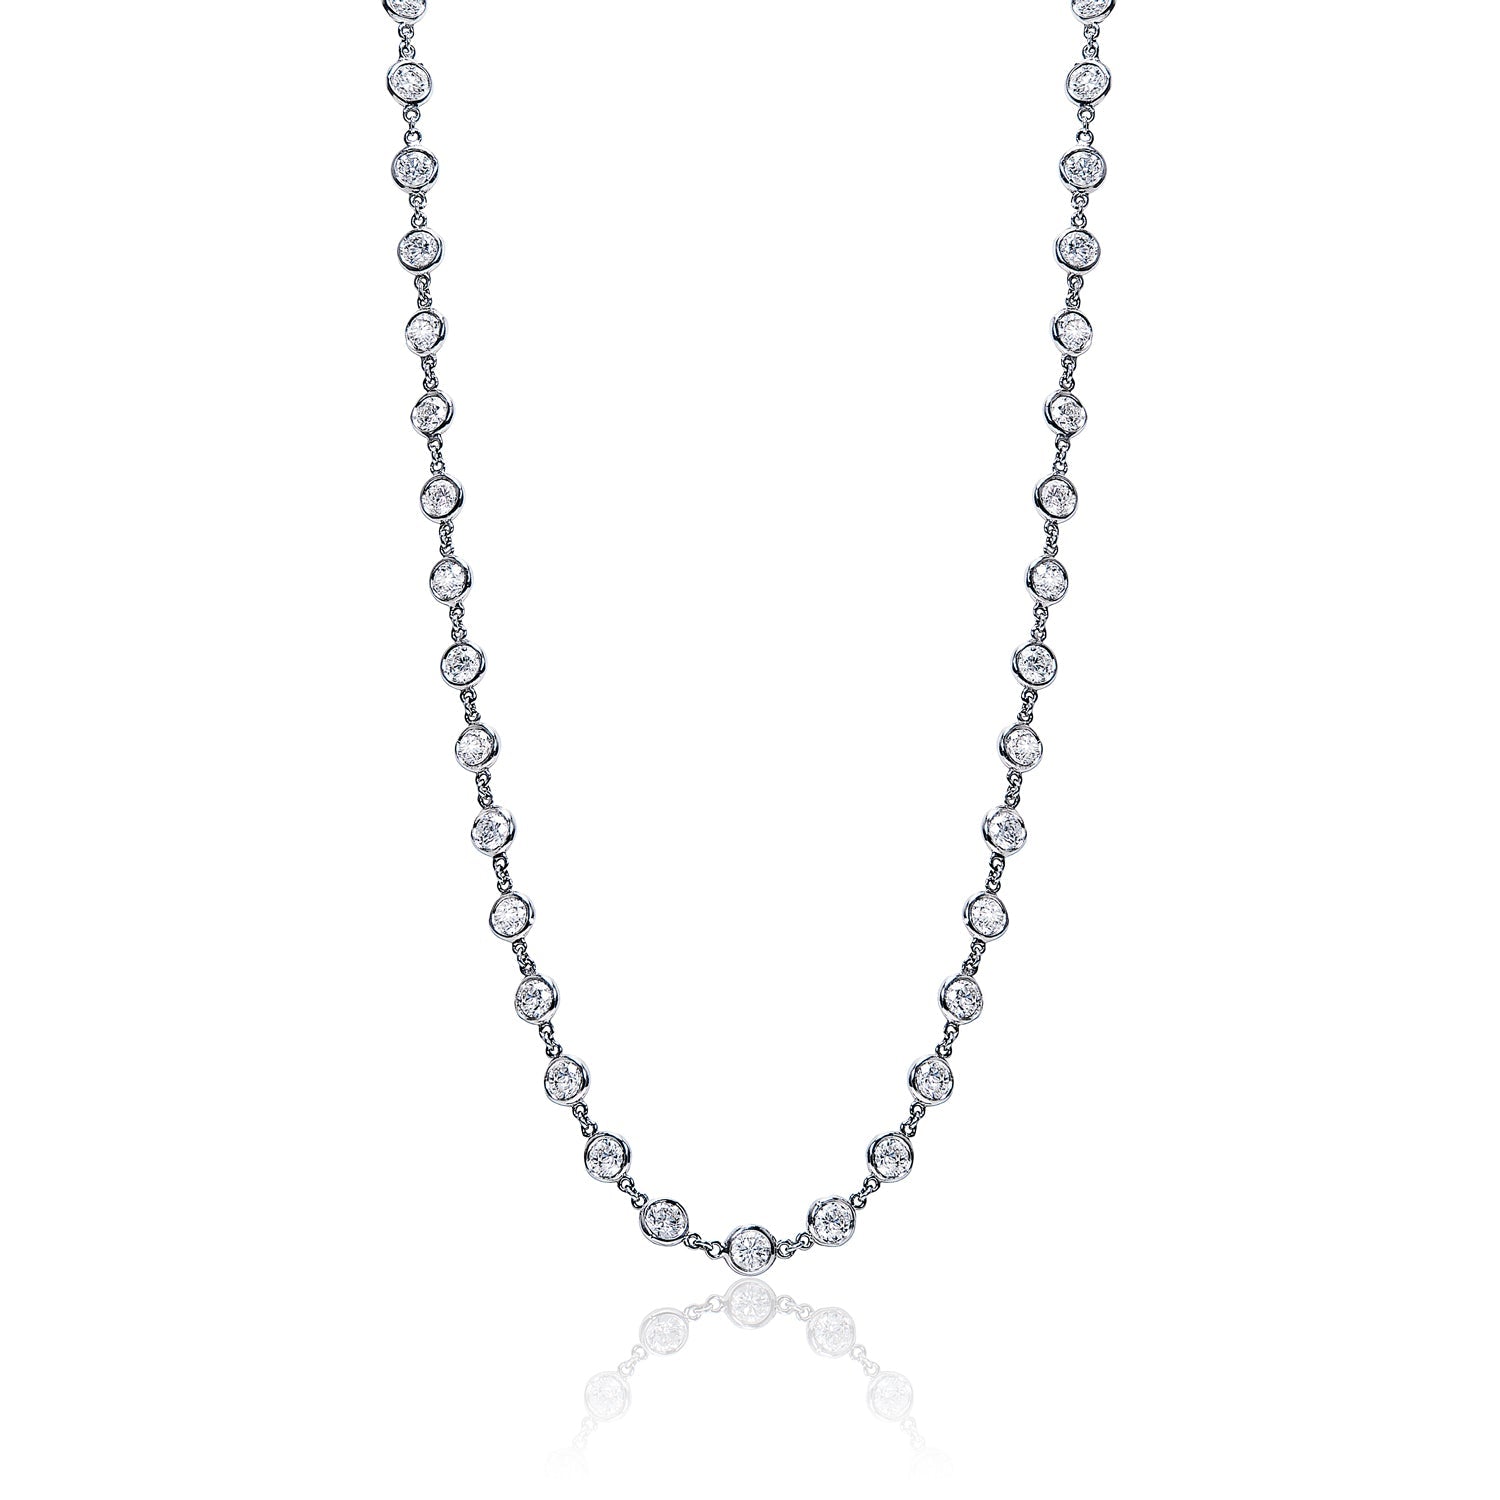 Kora 12 Carat Round Brilliant Diamonds By The Yard Necklace in 14KP For Ladies Full View